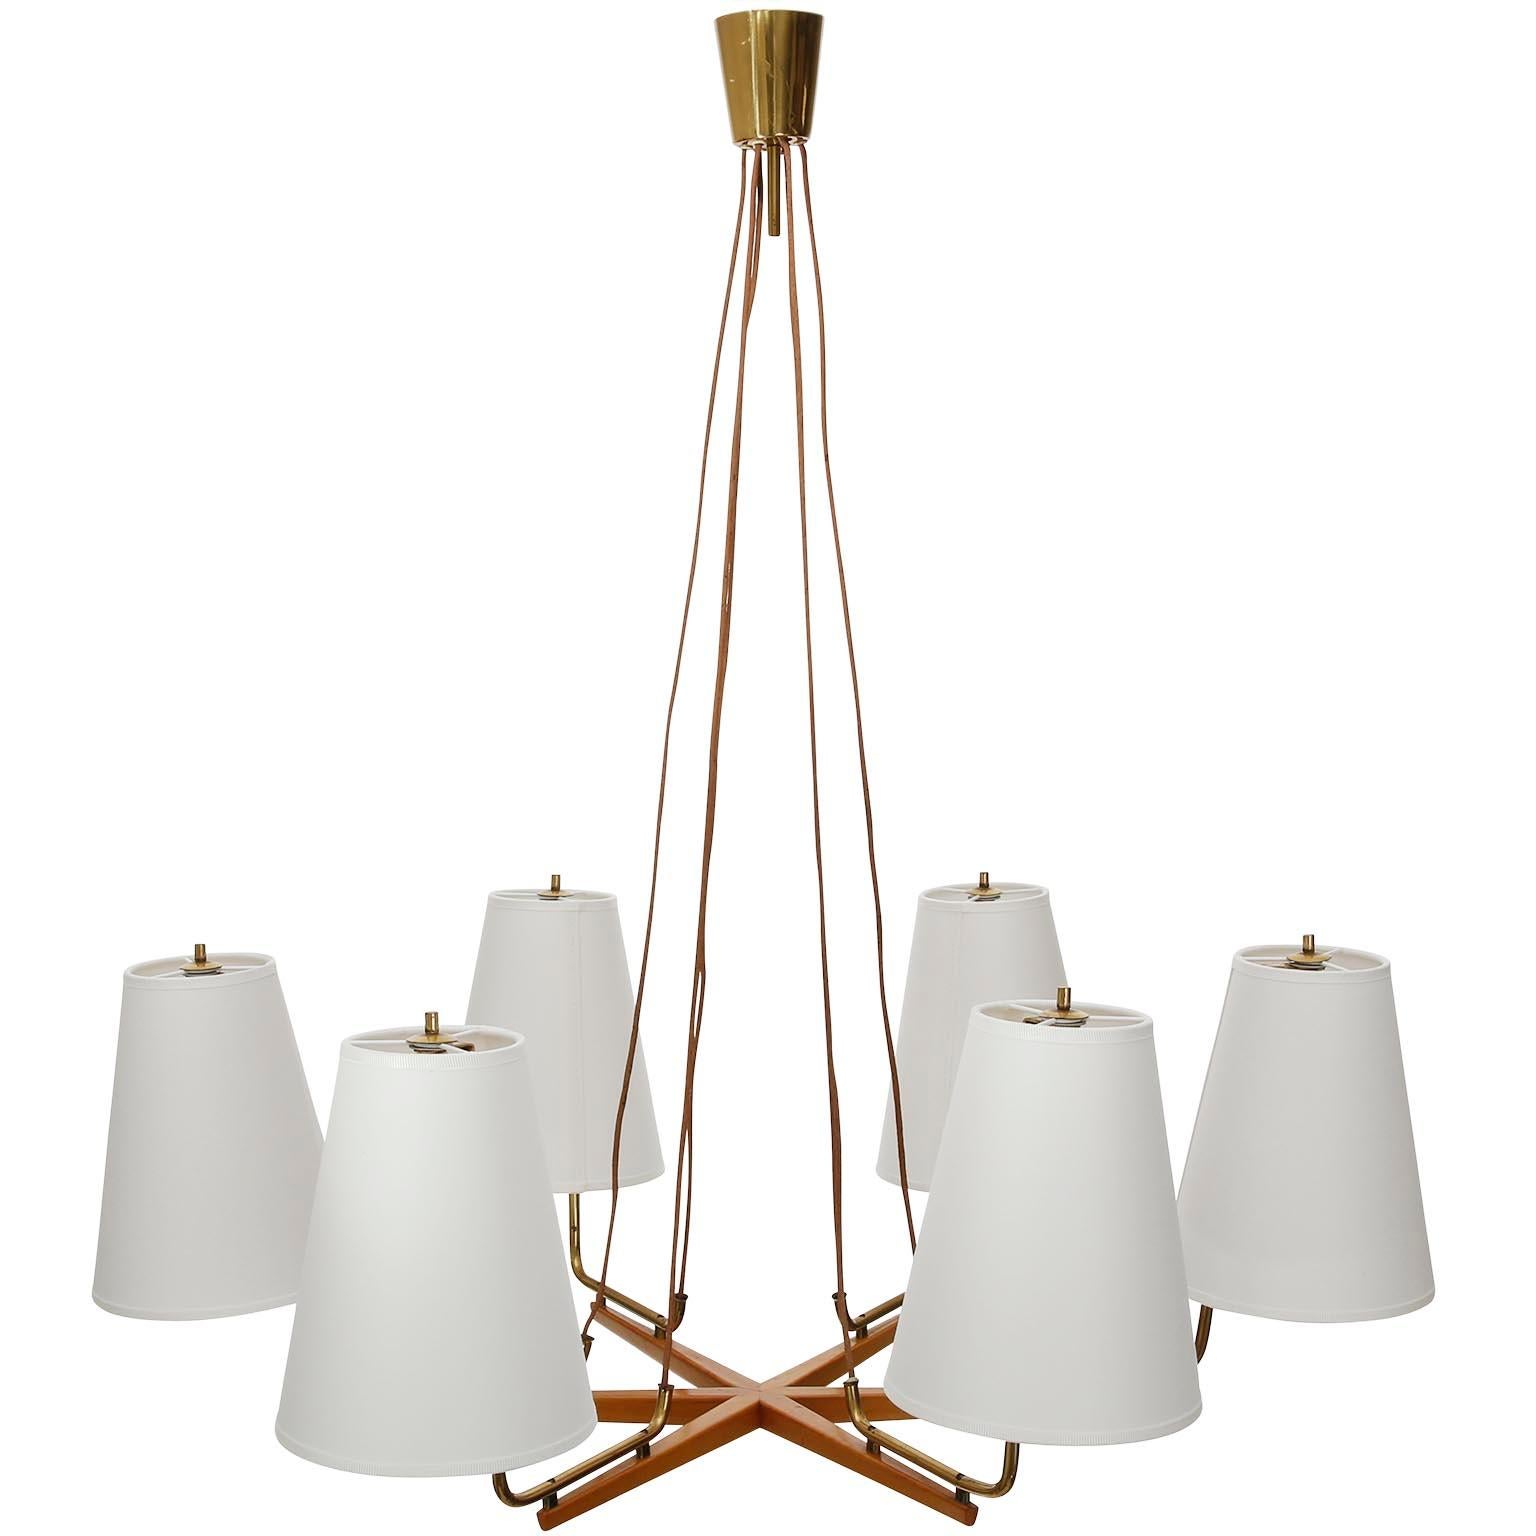 A large pendant lamp model no. 3652/6 'Holzstern' (England. wood star) by J.T. Kalmar, Austria.
J.T. Kalmar designed the chandelier Holzstern already in the 1930s. The offered light was manufactured in midcentury, circa 1960.
It is documented in the